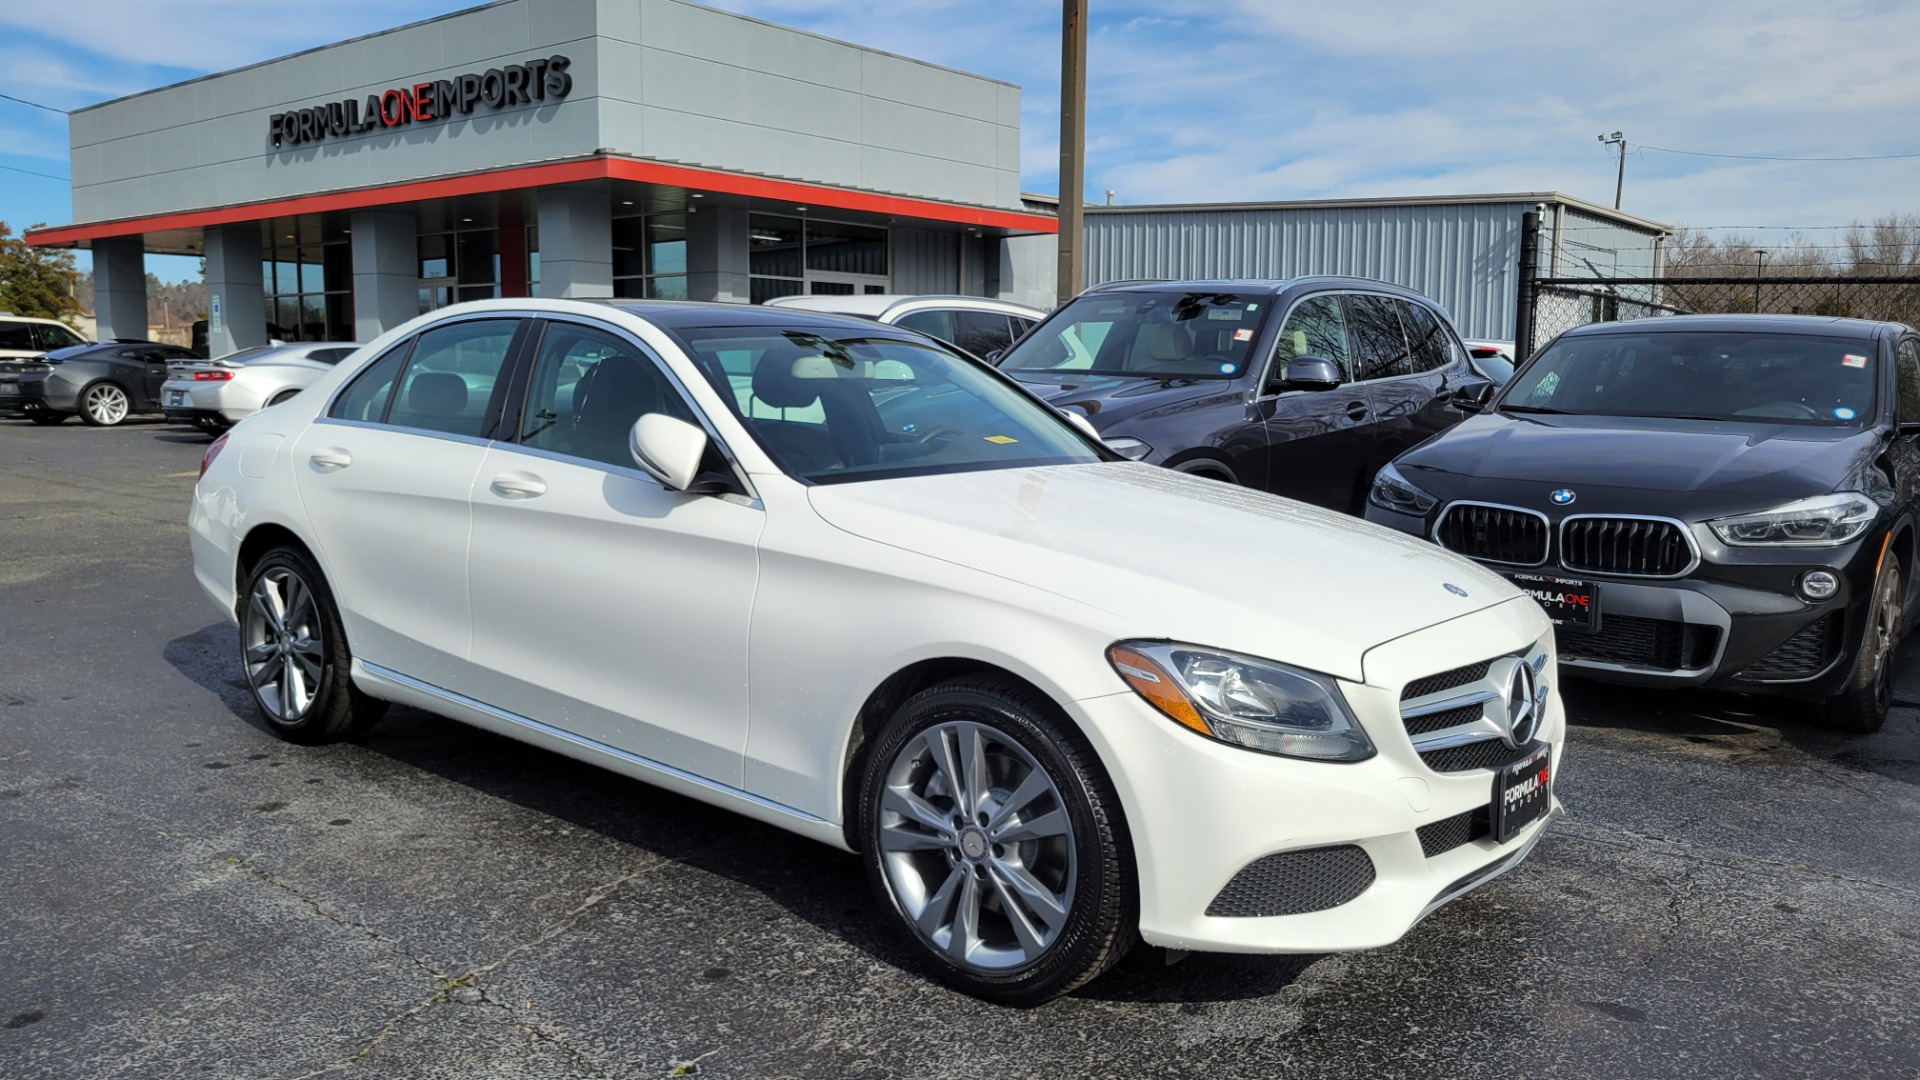 Used 2016 Mercedes-Benz C-CLASS C 300 4MATIC / PANO-ROOF / HTD STS / SIRIUSXM RADIO / REARVIEW for sale Sold at Formula Imports in Charlotte NC 28227 4